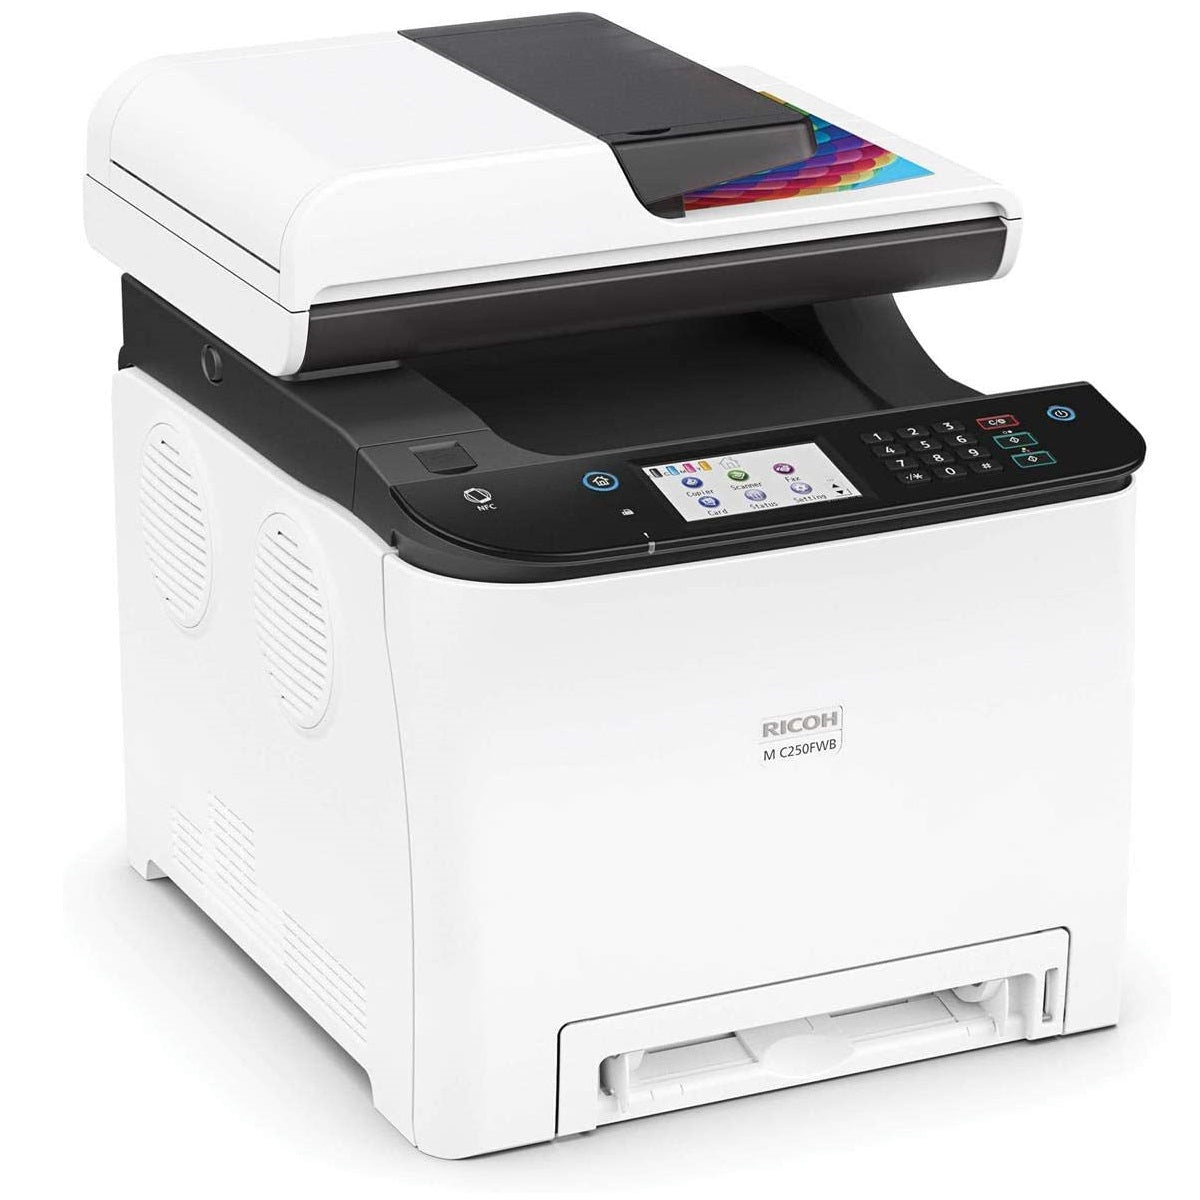 Prepare Yourself For high Impact RICOH M C250FWB A4 Multifunction Digital Color Laser Printer, Perfect For Small Offices With Demanding Print Requirements - For Sale By Absolute Toner In Toronto